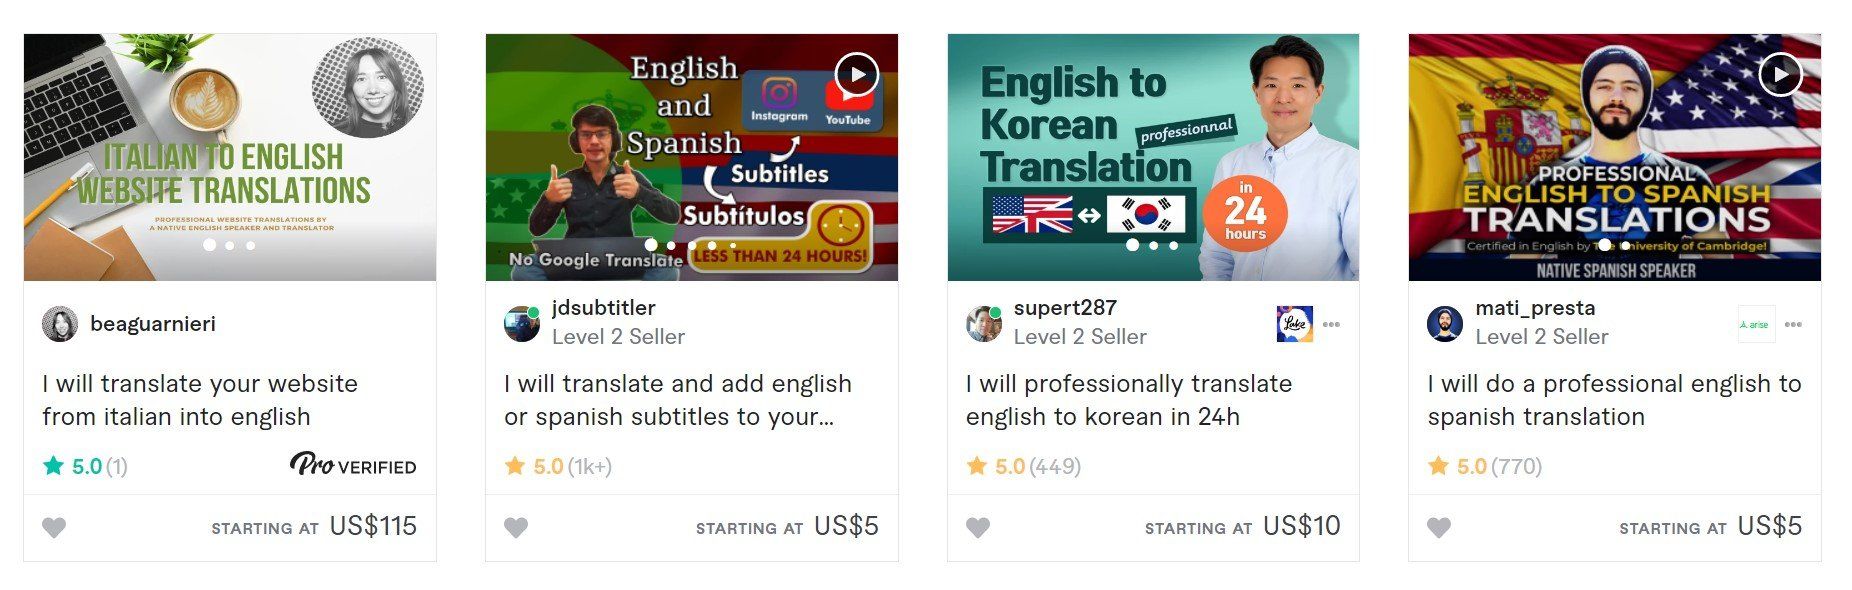 How to translate your entire website online at an affordable price - freelance translator